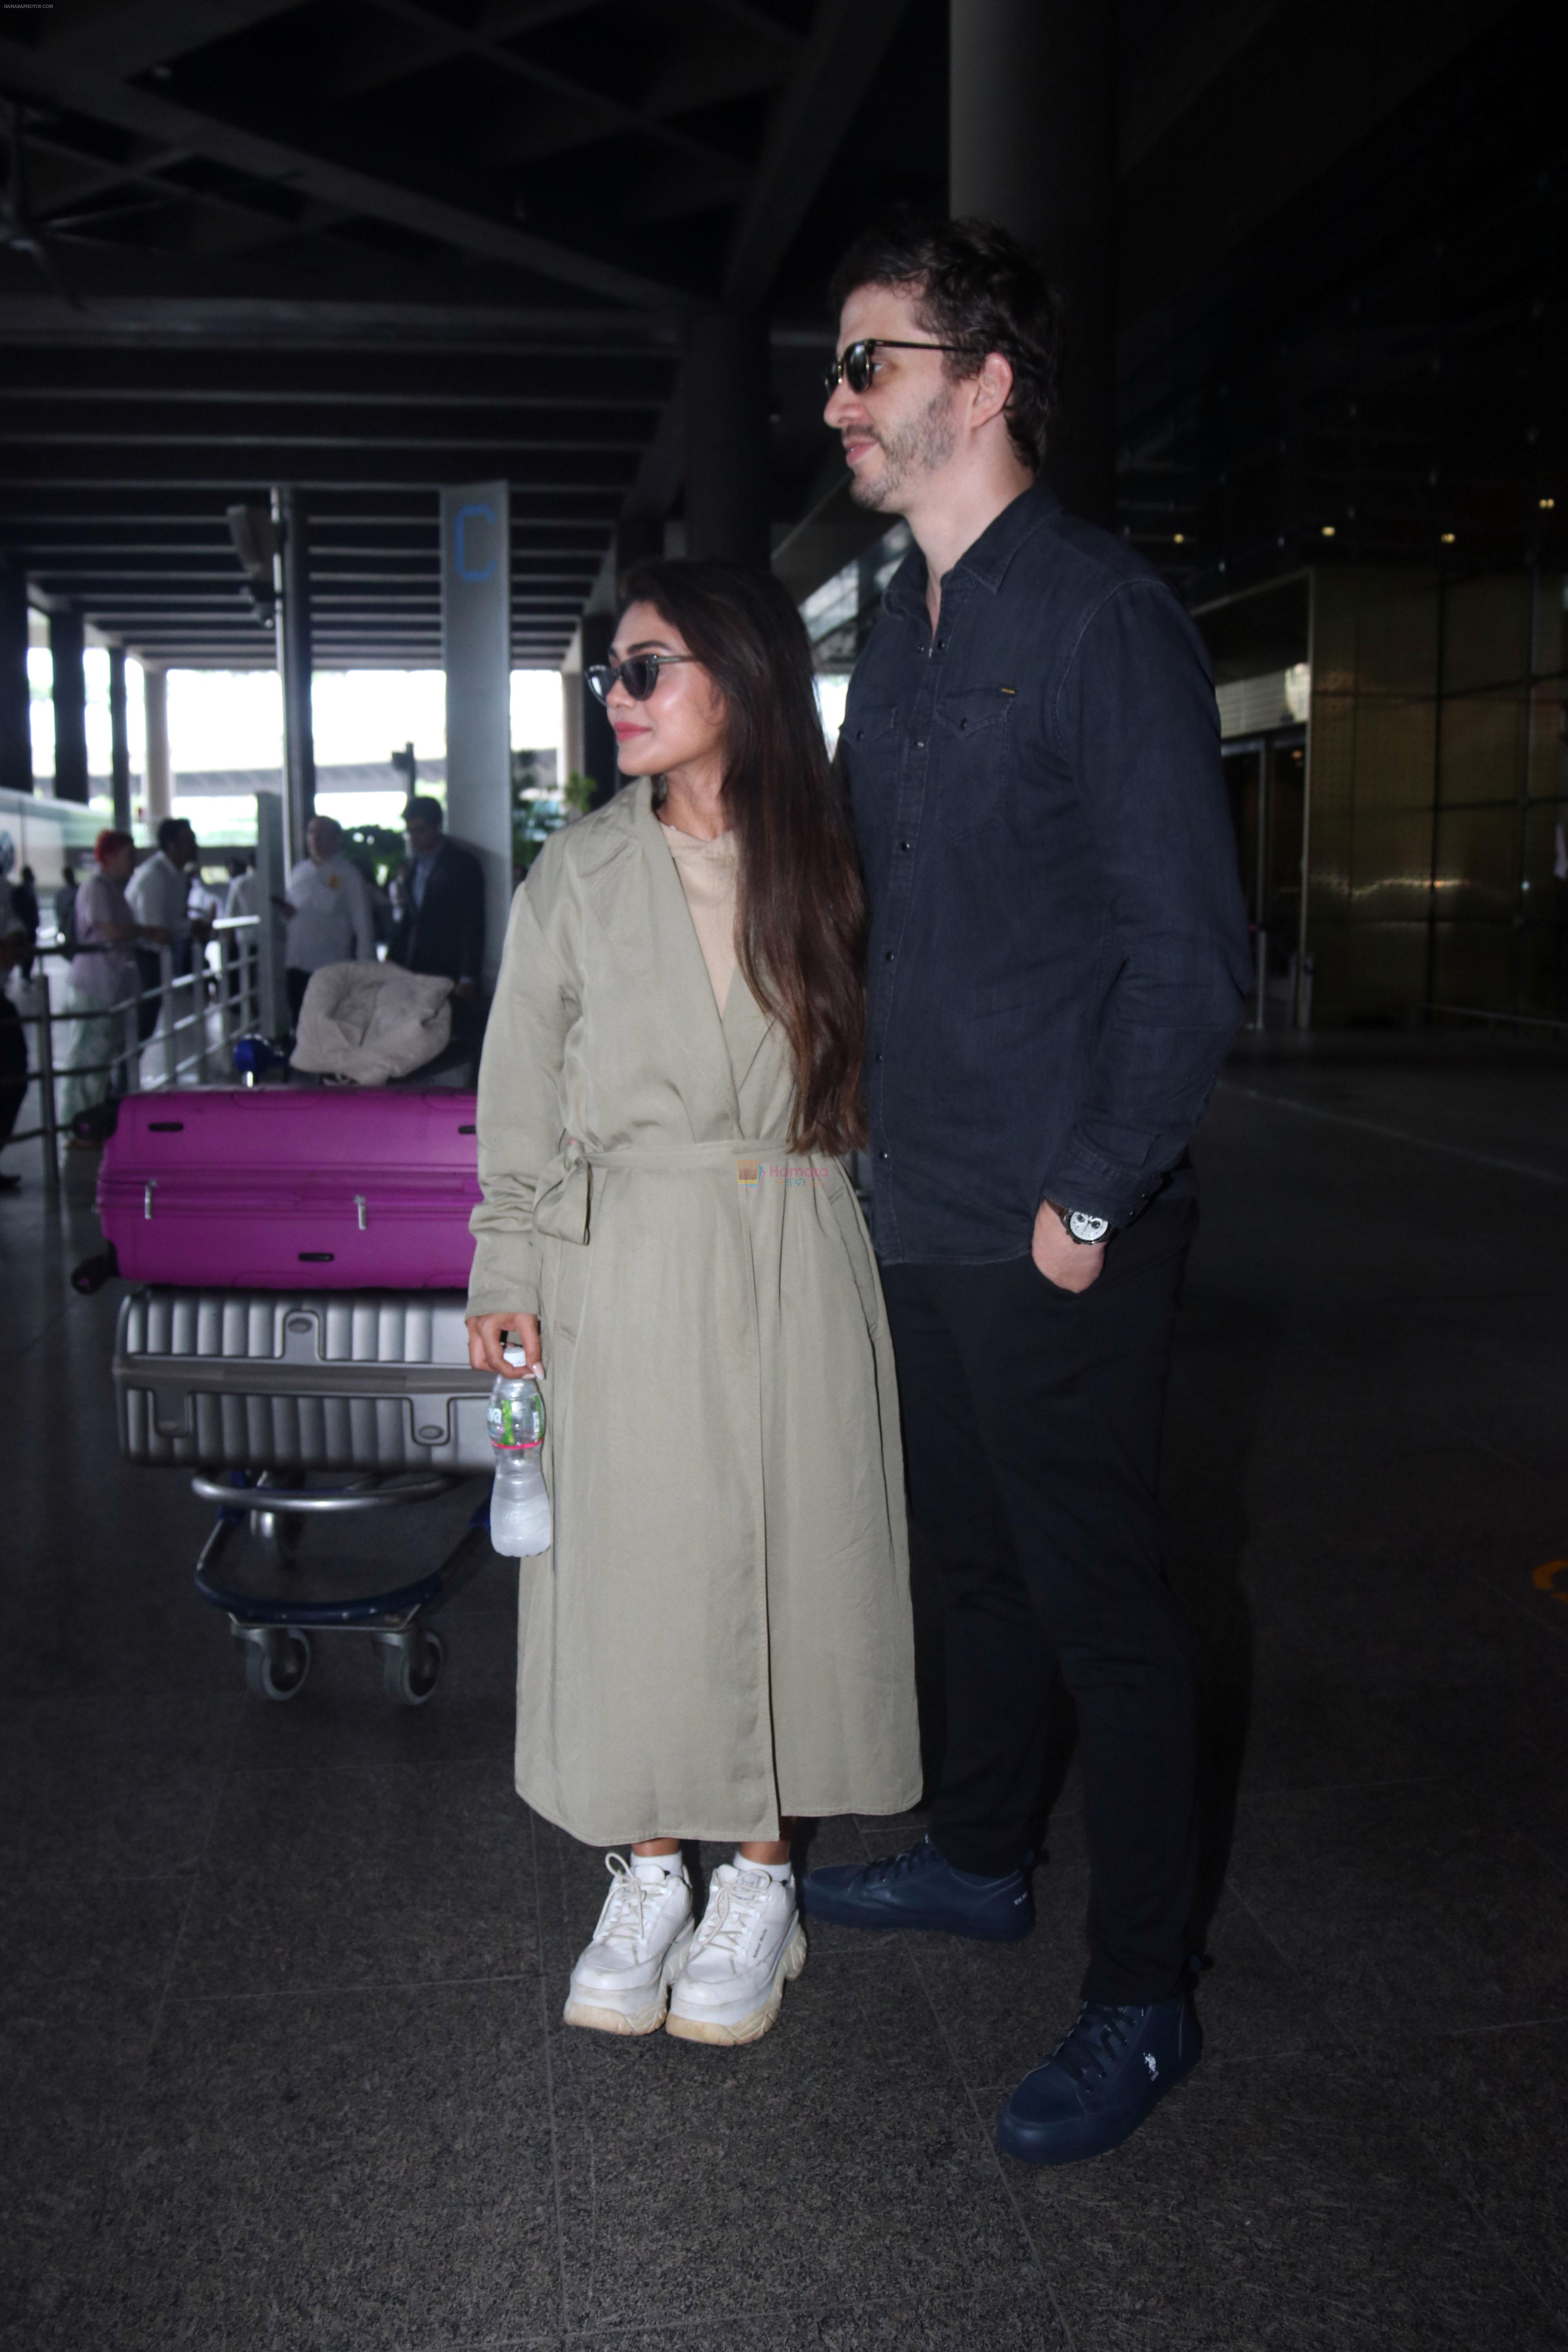 Sreejita De with husband Michael Blohm-Pape seen at the airport on 7 July 2023